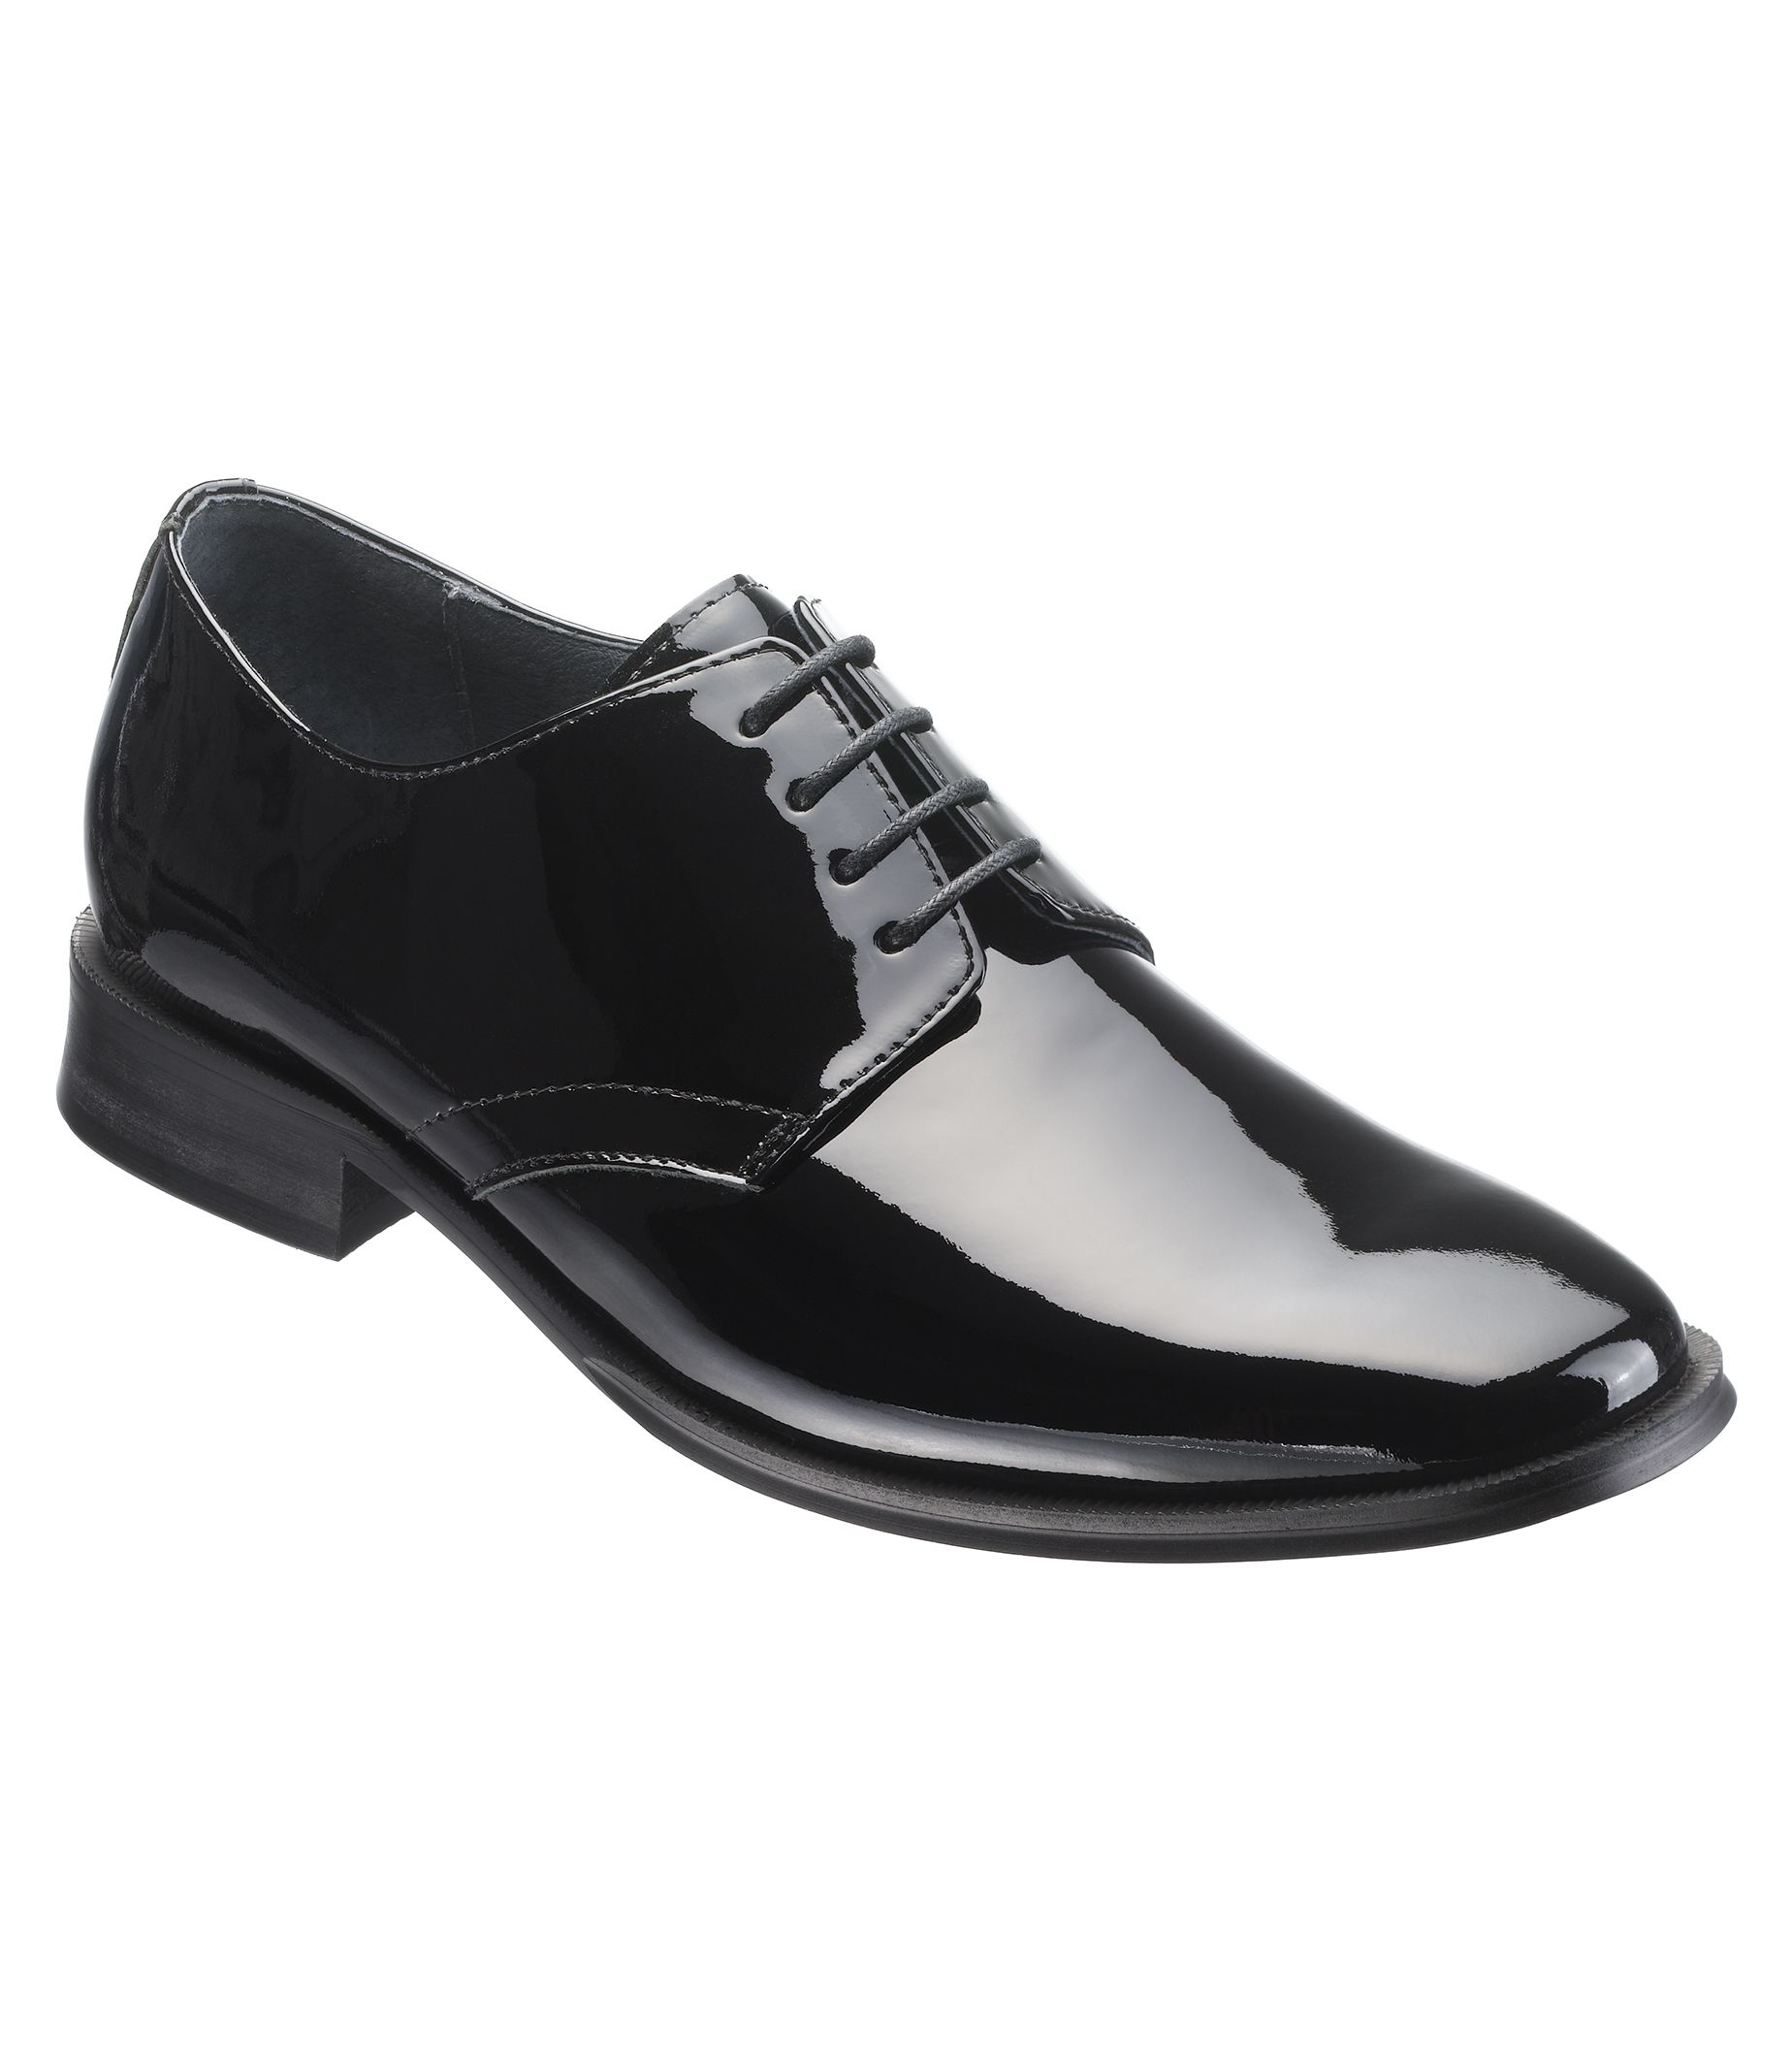 Jazz Lace Up Shoe by Joseph A. Bank - All Shoes | Jos A Bank